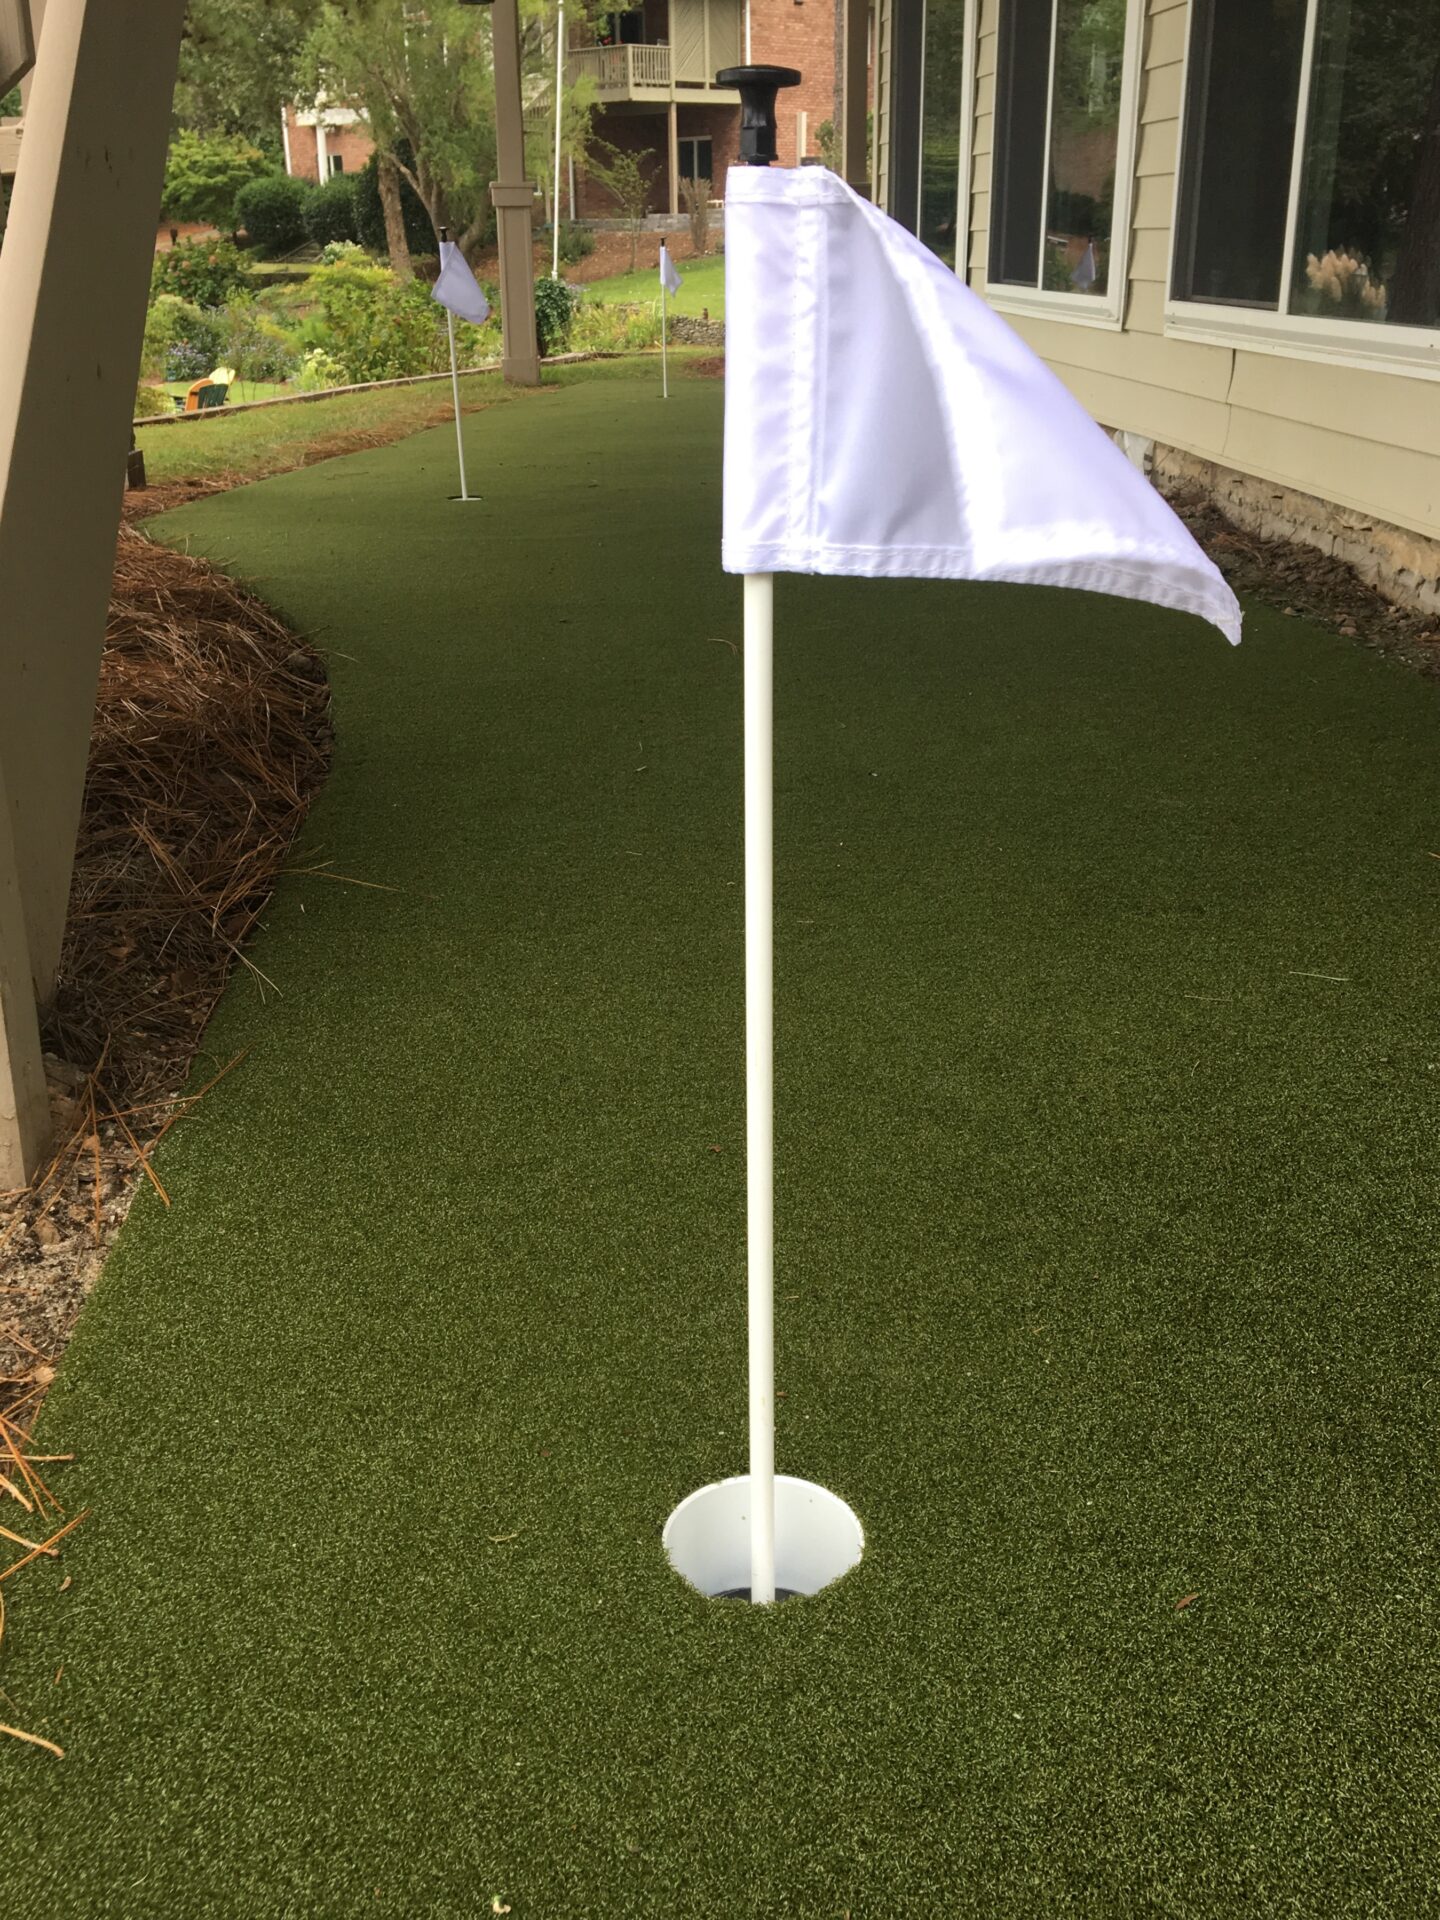 A white flag attached to a pole on a synthetic putting green with a golf hole, surrounded by residential garden and house exterior.